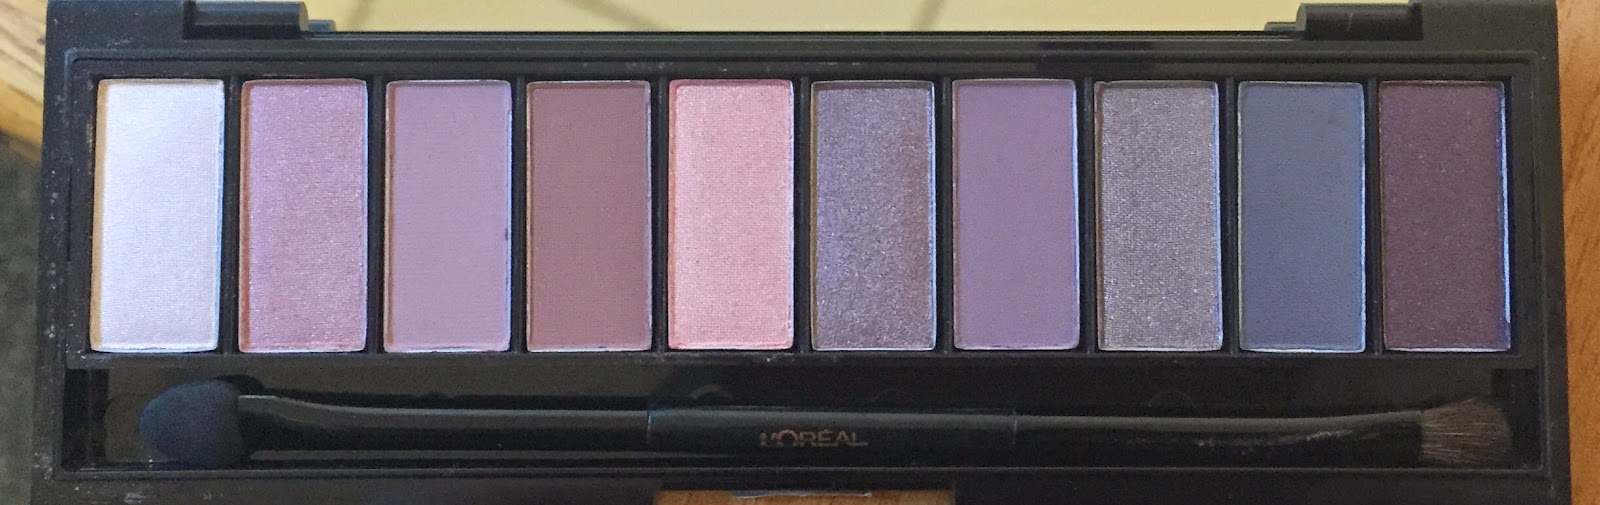 L'Oreal La Palette Nude Rose Review and Swatches